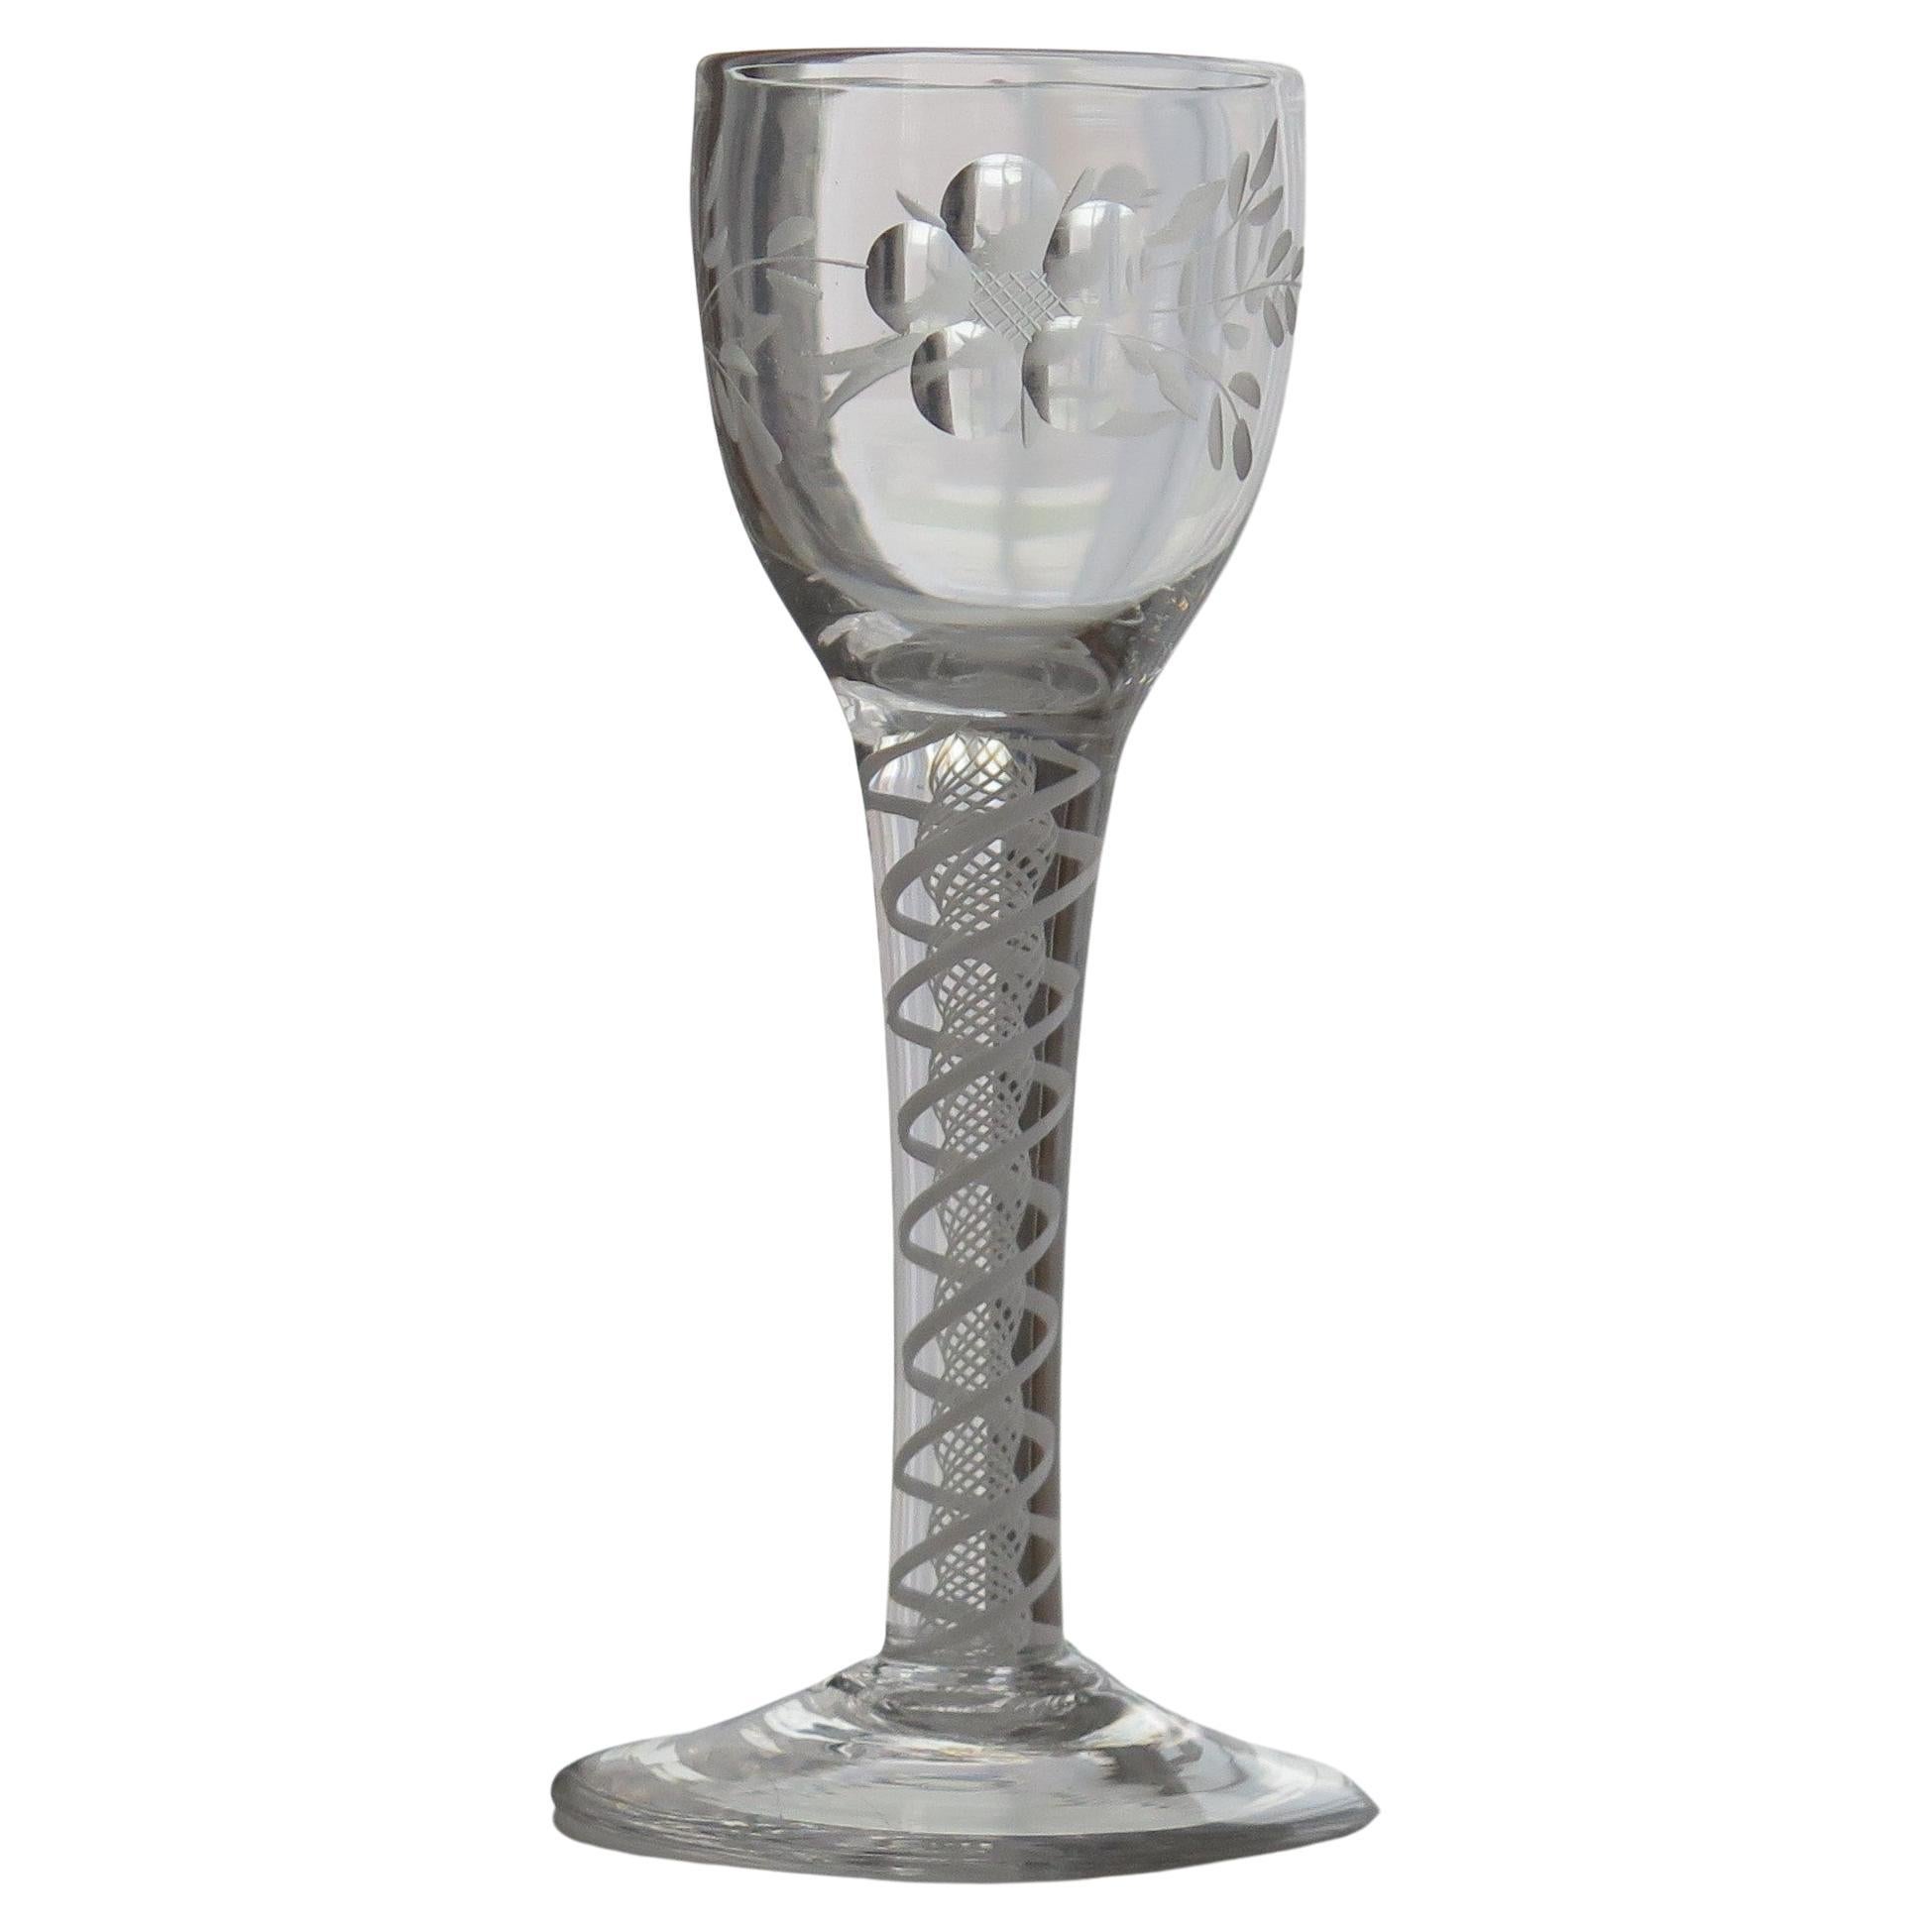 This is a very good hand-blown, Jacobite English, mid-Georgian, wine drinking glass with an engraved bowl and an opaque twist stem, dating from the middle of the 18th century, circa 1760.

Jacobite glasses have historical significance and are very